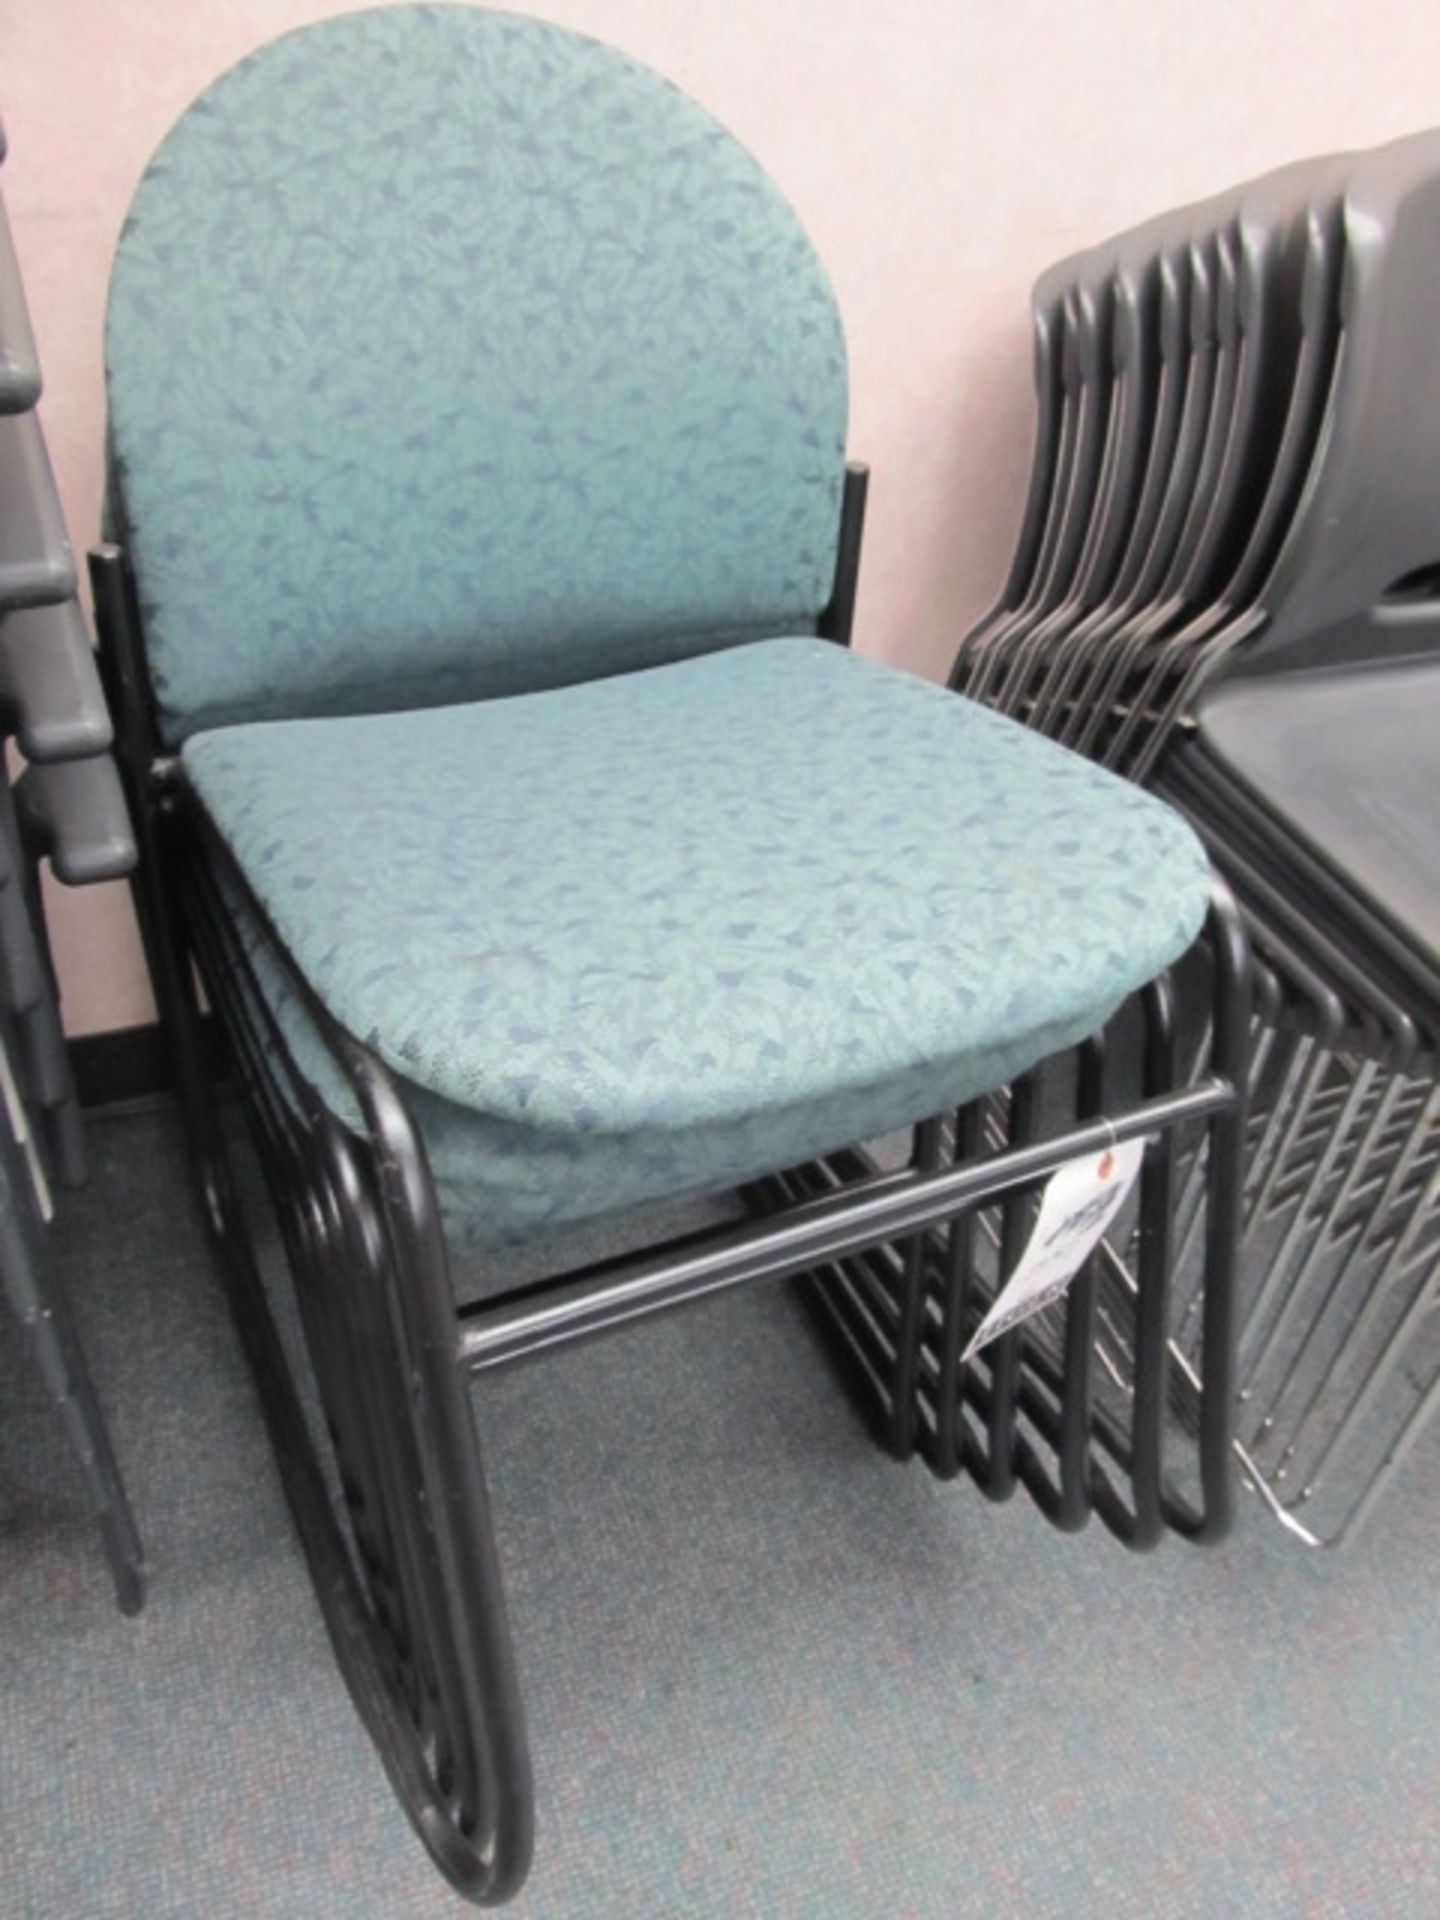 Cushioned Metal Frame Sleigh Bottom Chairs Asset Location: Front Offices, Site Location: Mira